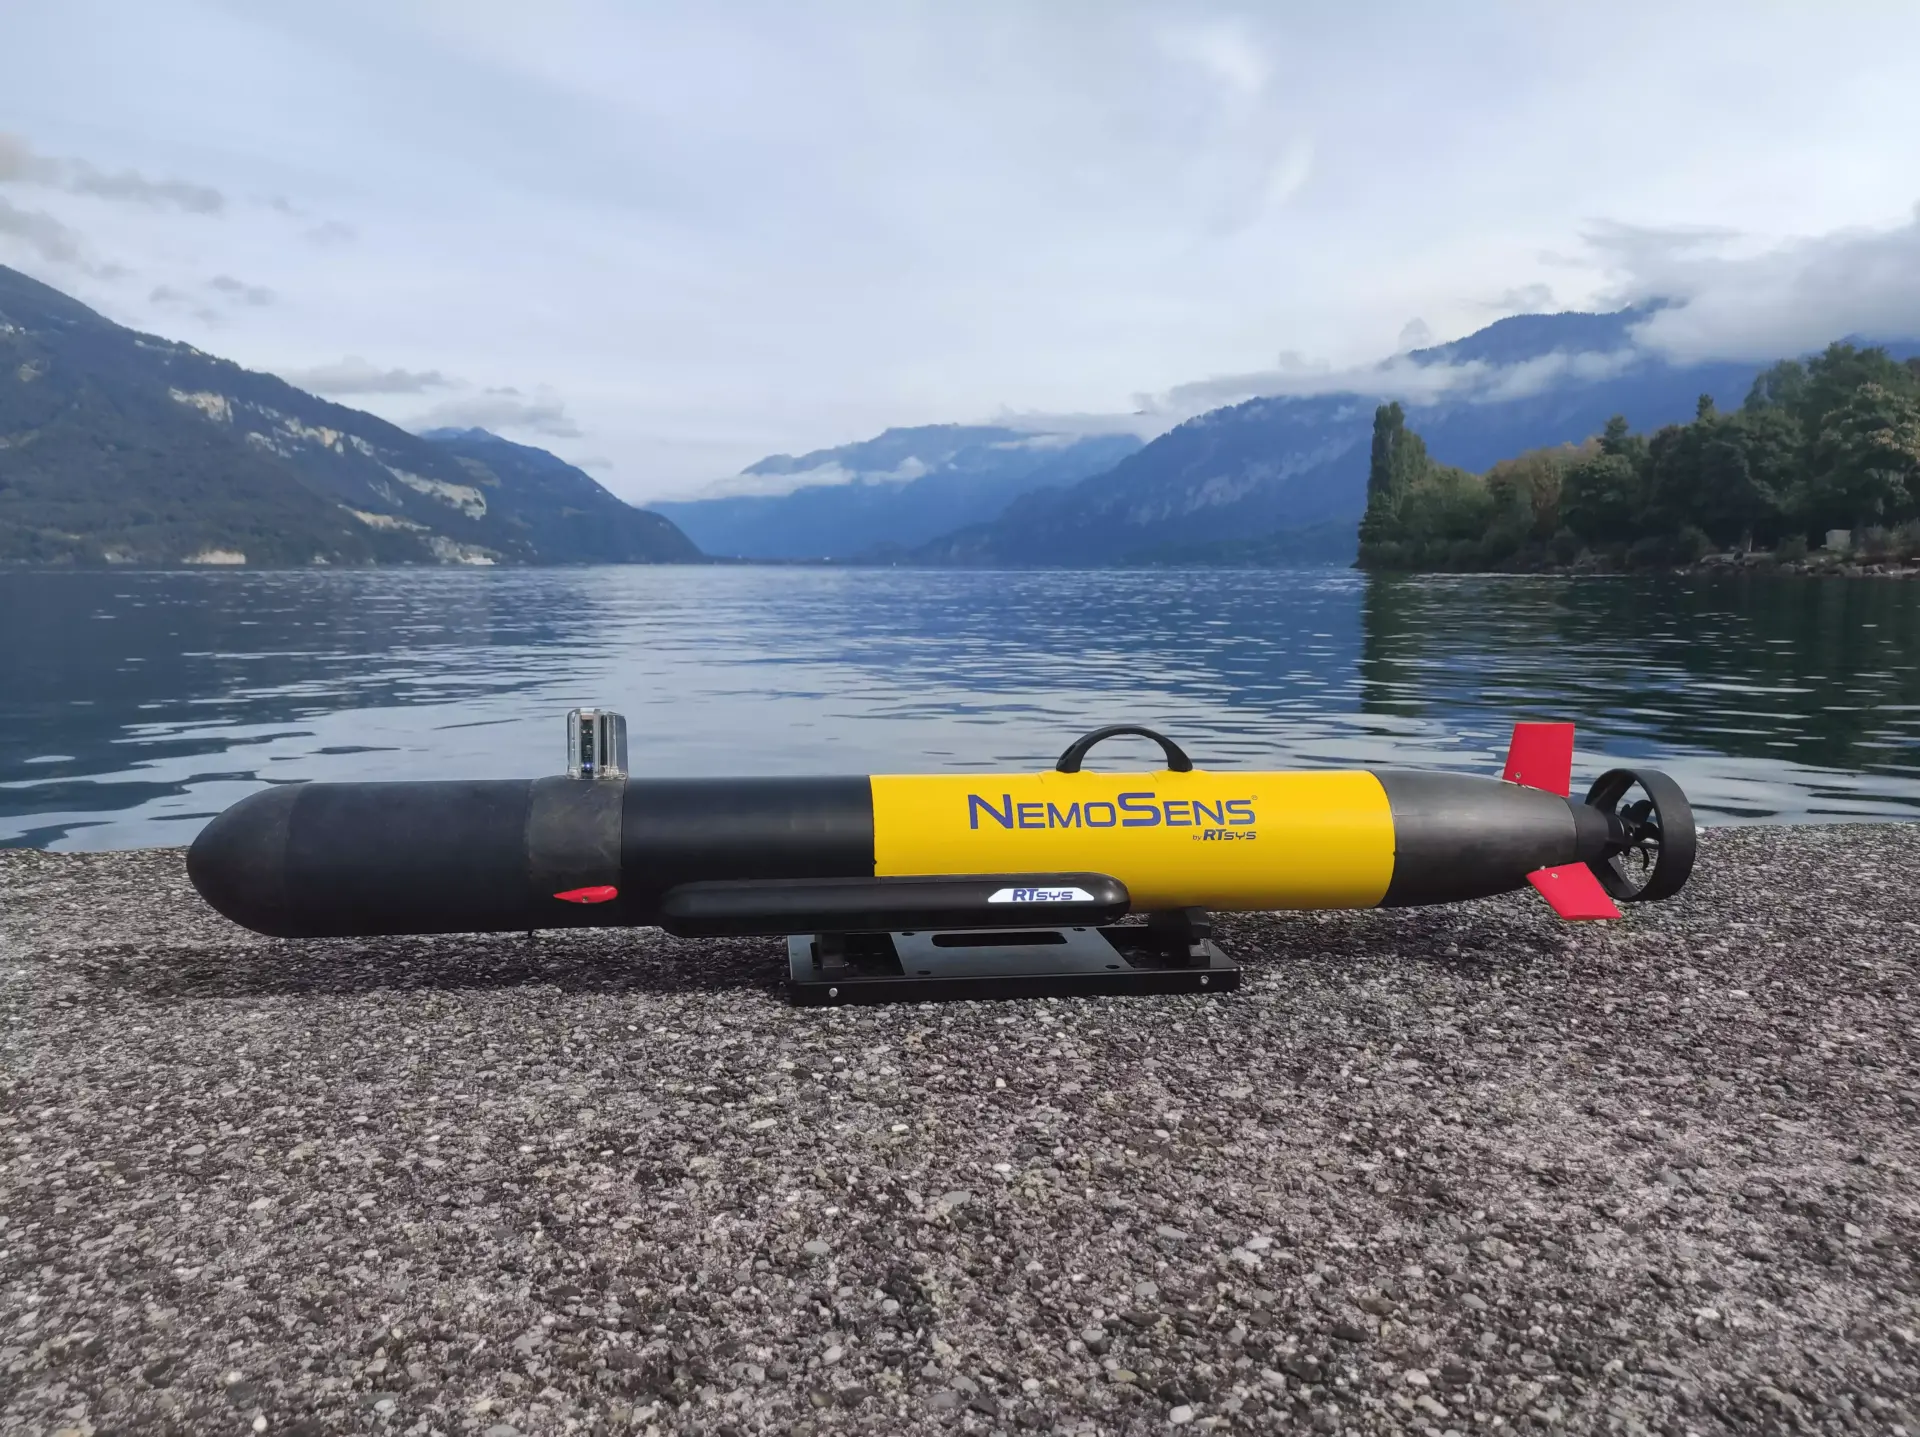 The NemoSens AUV on shore by the mountains.